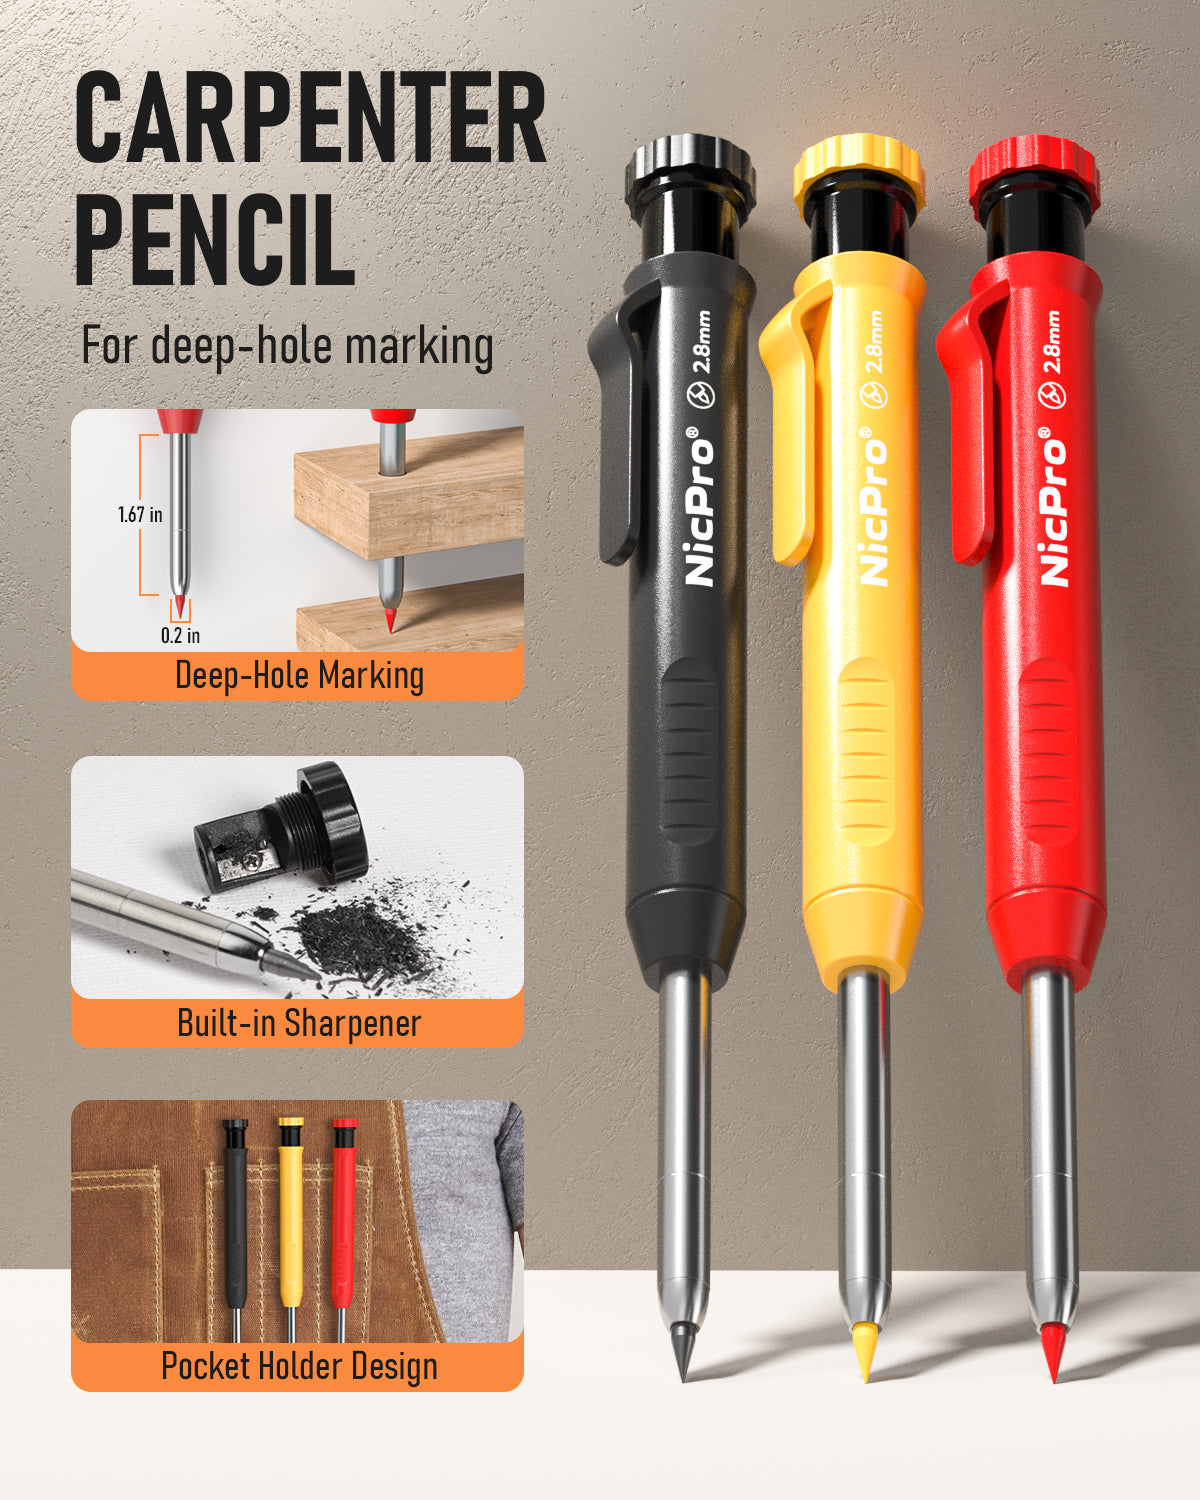 Nicpro 15 Pack Mechanical Carpenter Pencil Set with 42 Refills & Carbide Scribe Tool, Deep Hole Marker Construction Pencils Heavy Duty Woodworking Pencils Built-in Sharpener for Construction Architect